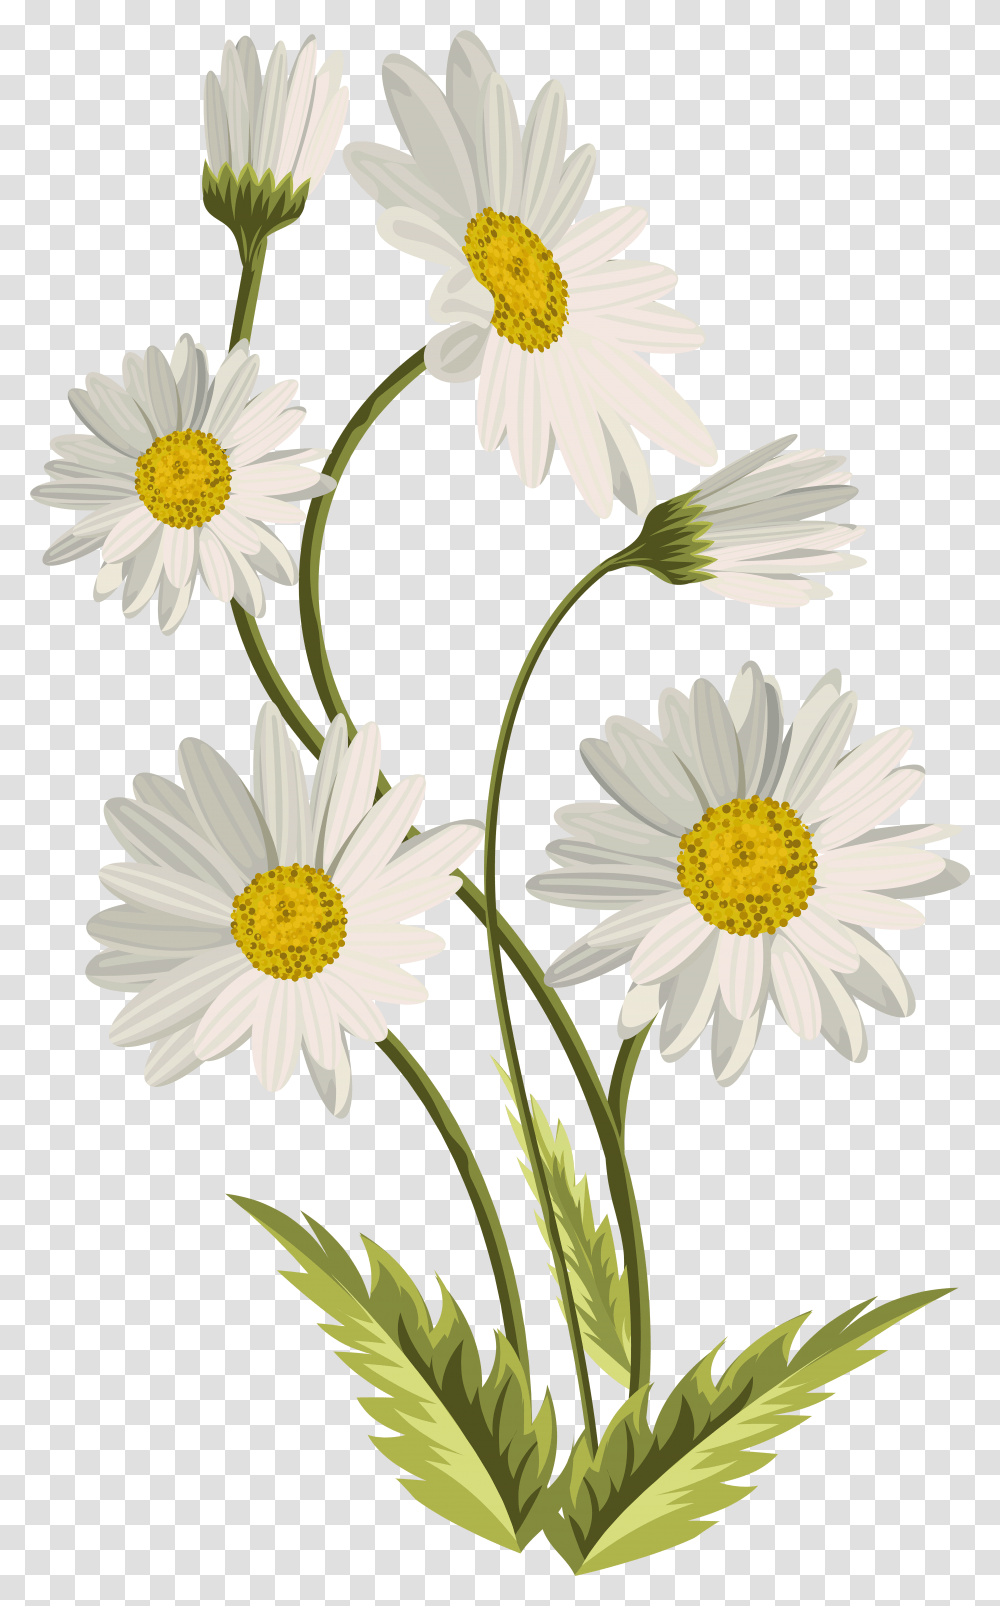 Common Daisy Art Clip Art Background Daisy Flower, Plant, Daisies, Blossom Transparent Png